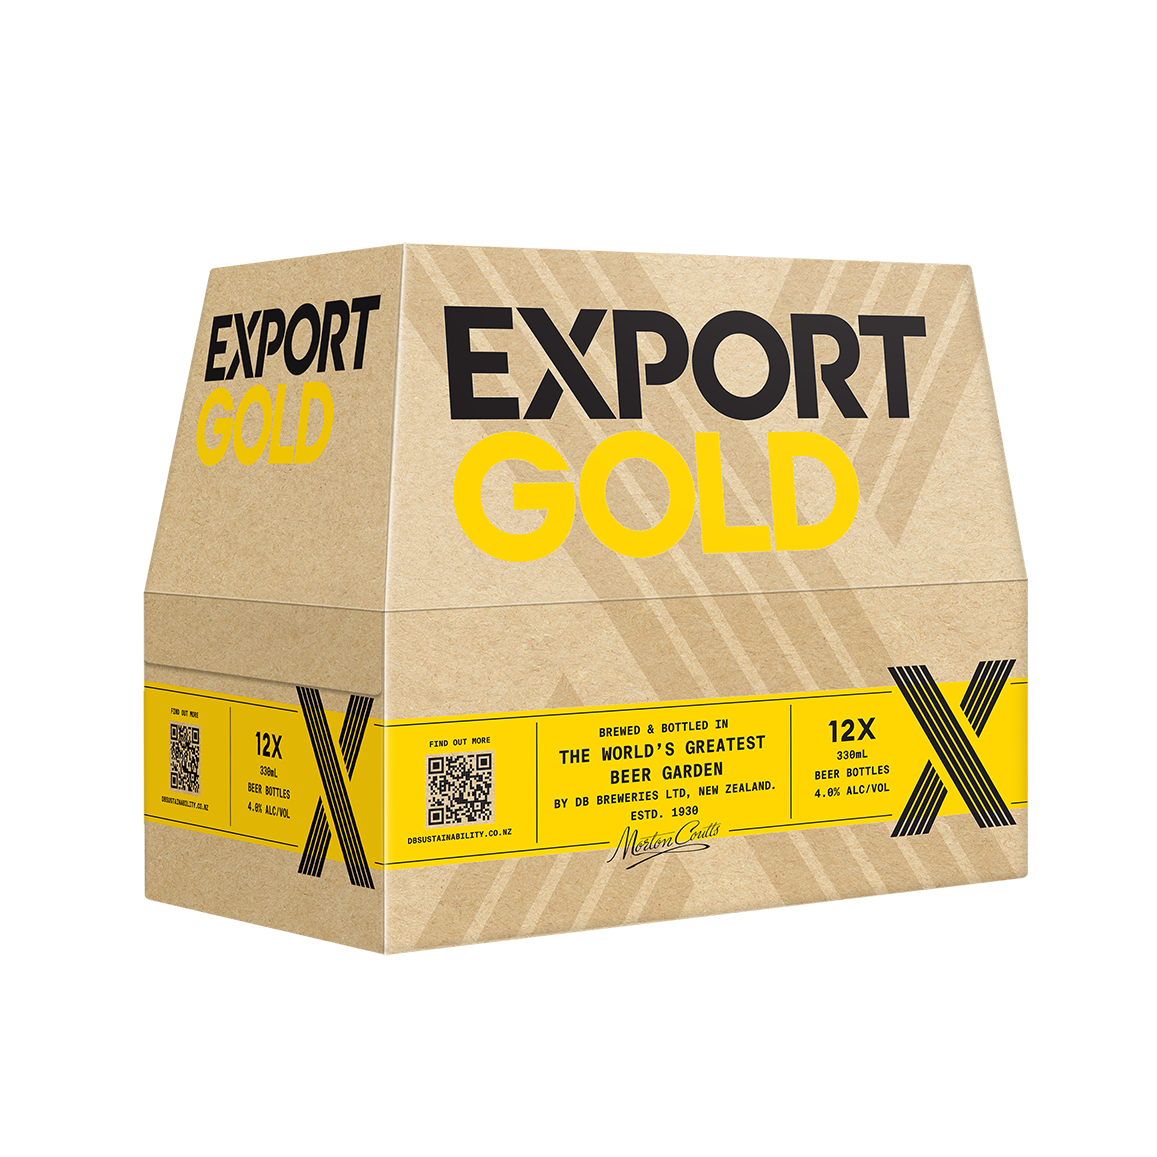 Export Gold 330 Ml 12 Pack 02 21 (2)